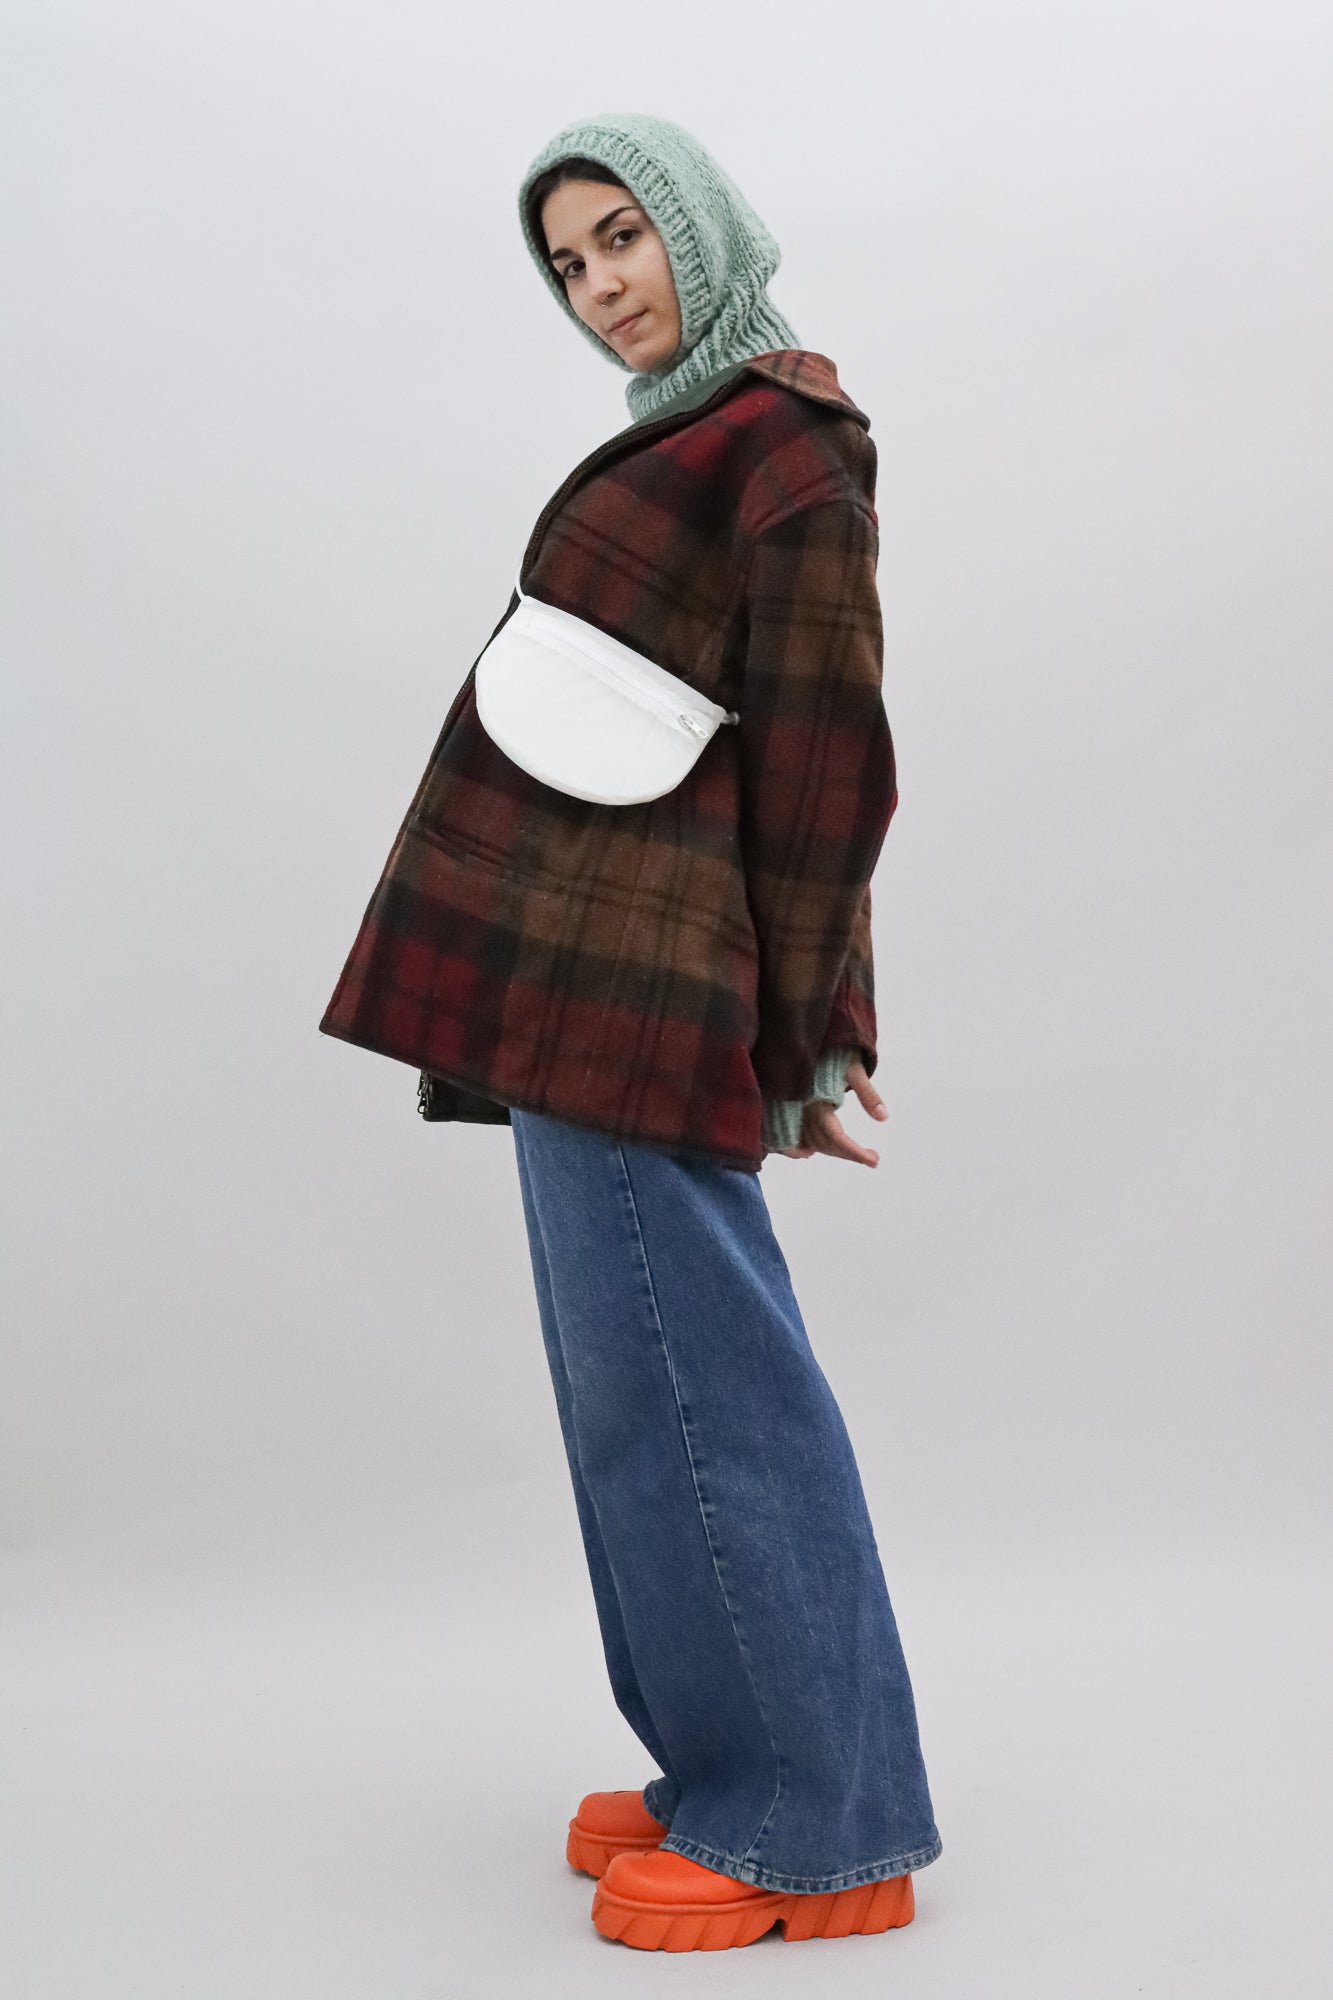 Model wears Cross body bag in white / clear from upcycled nylon cut from vintage paragliders